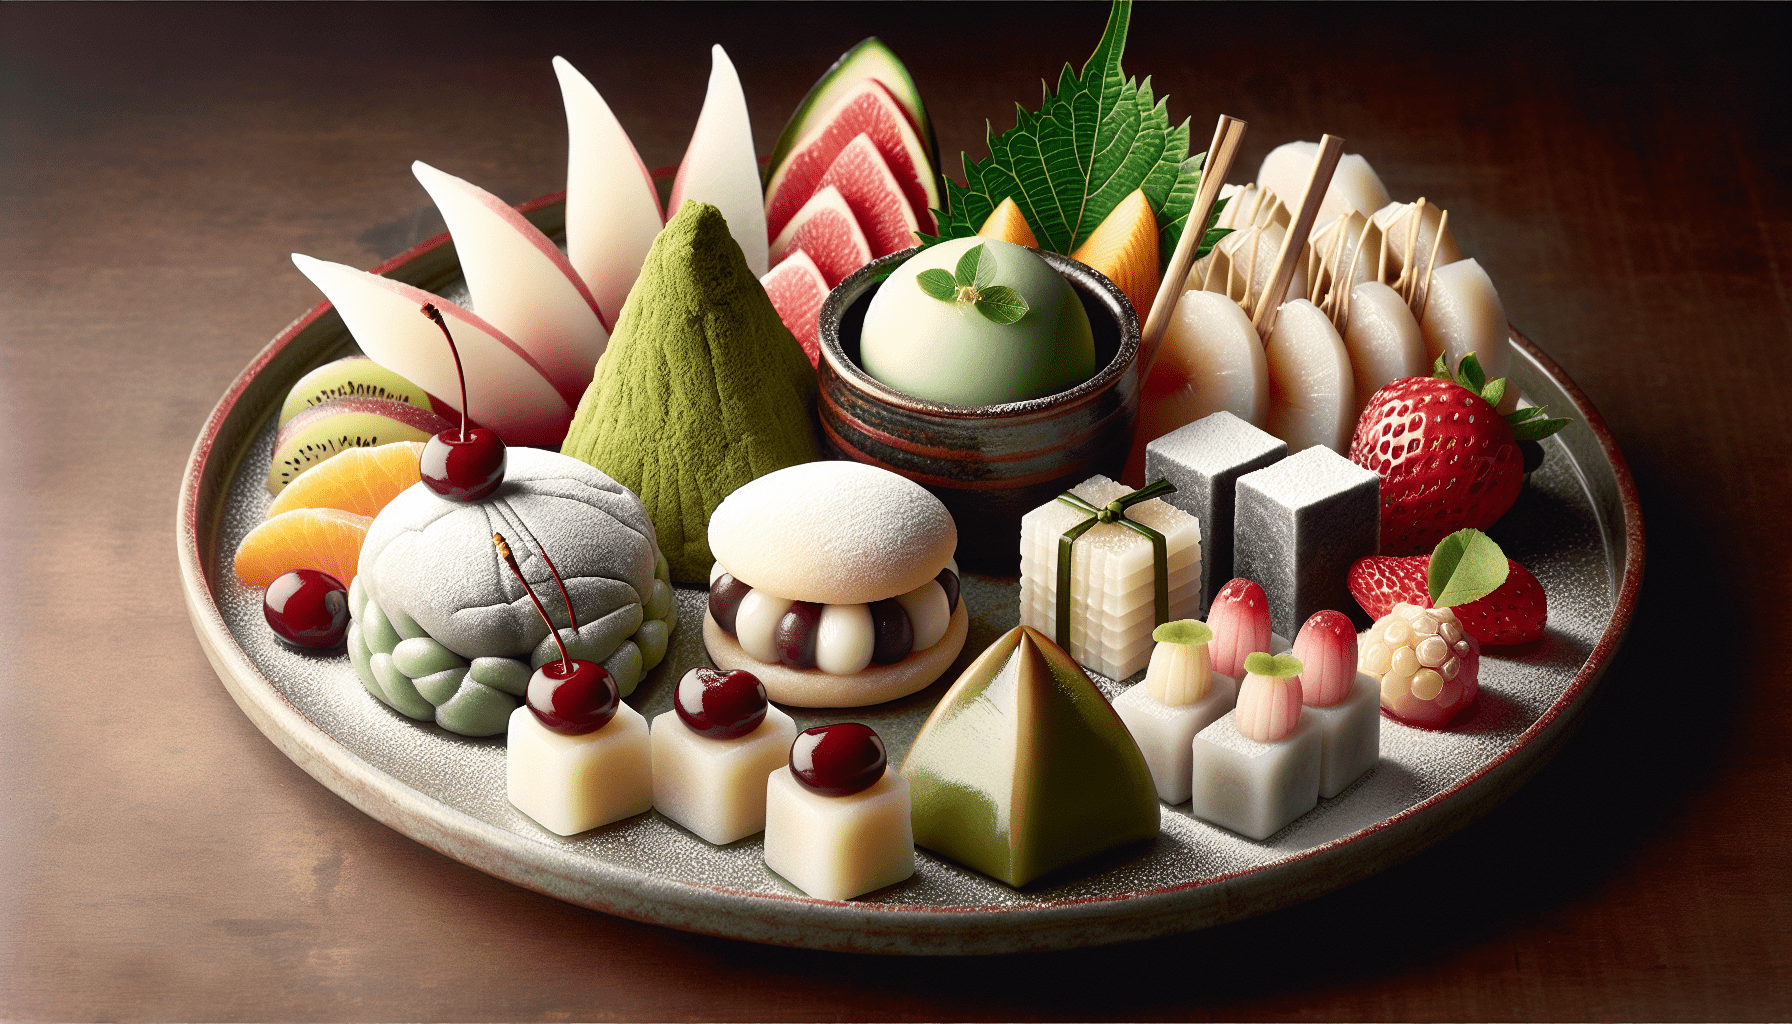 Whats Your Favorite Japanese Dessert Thats Both Healthy And Delicious?